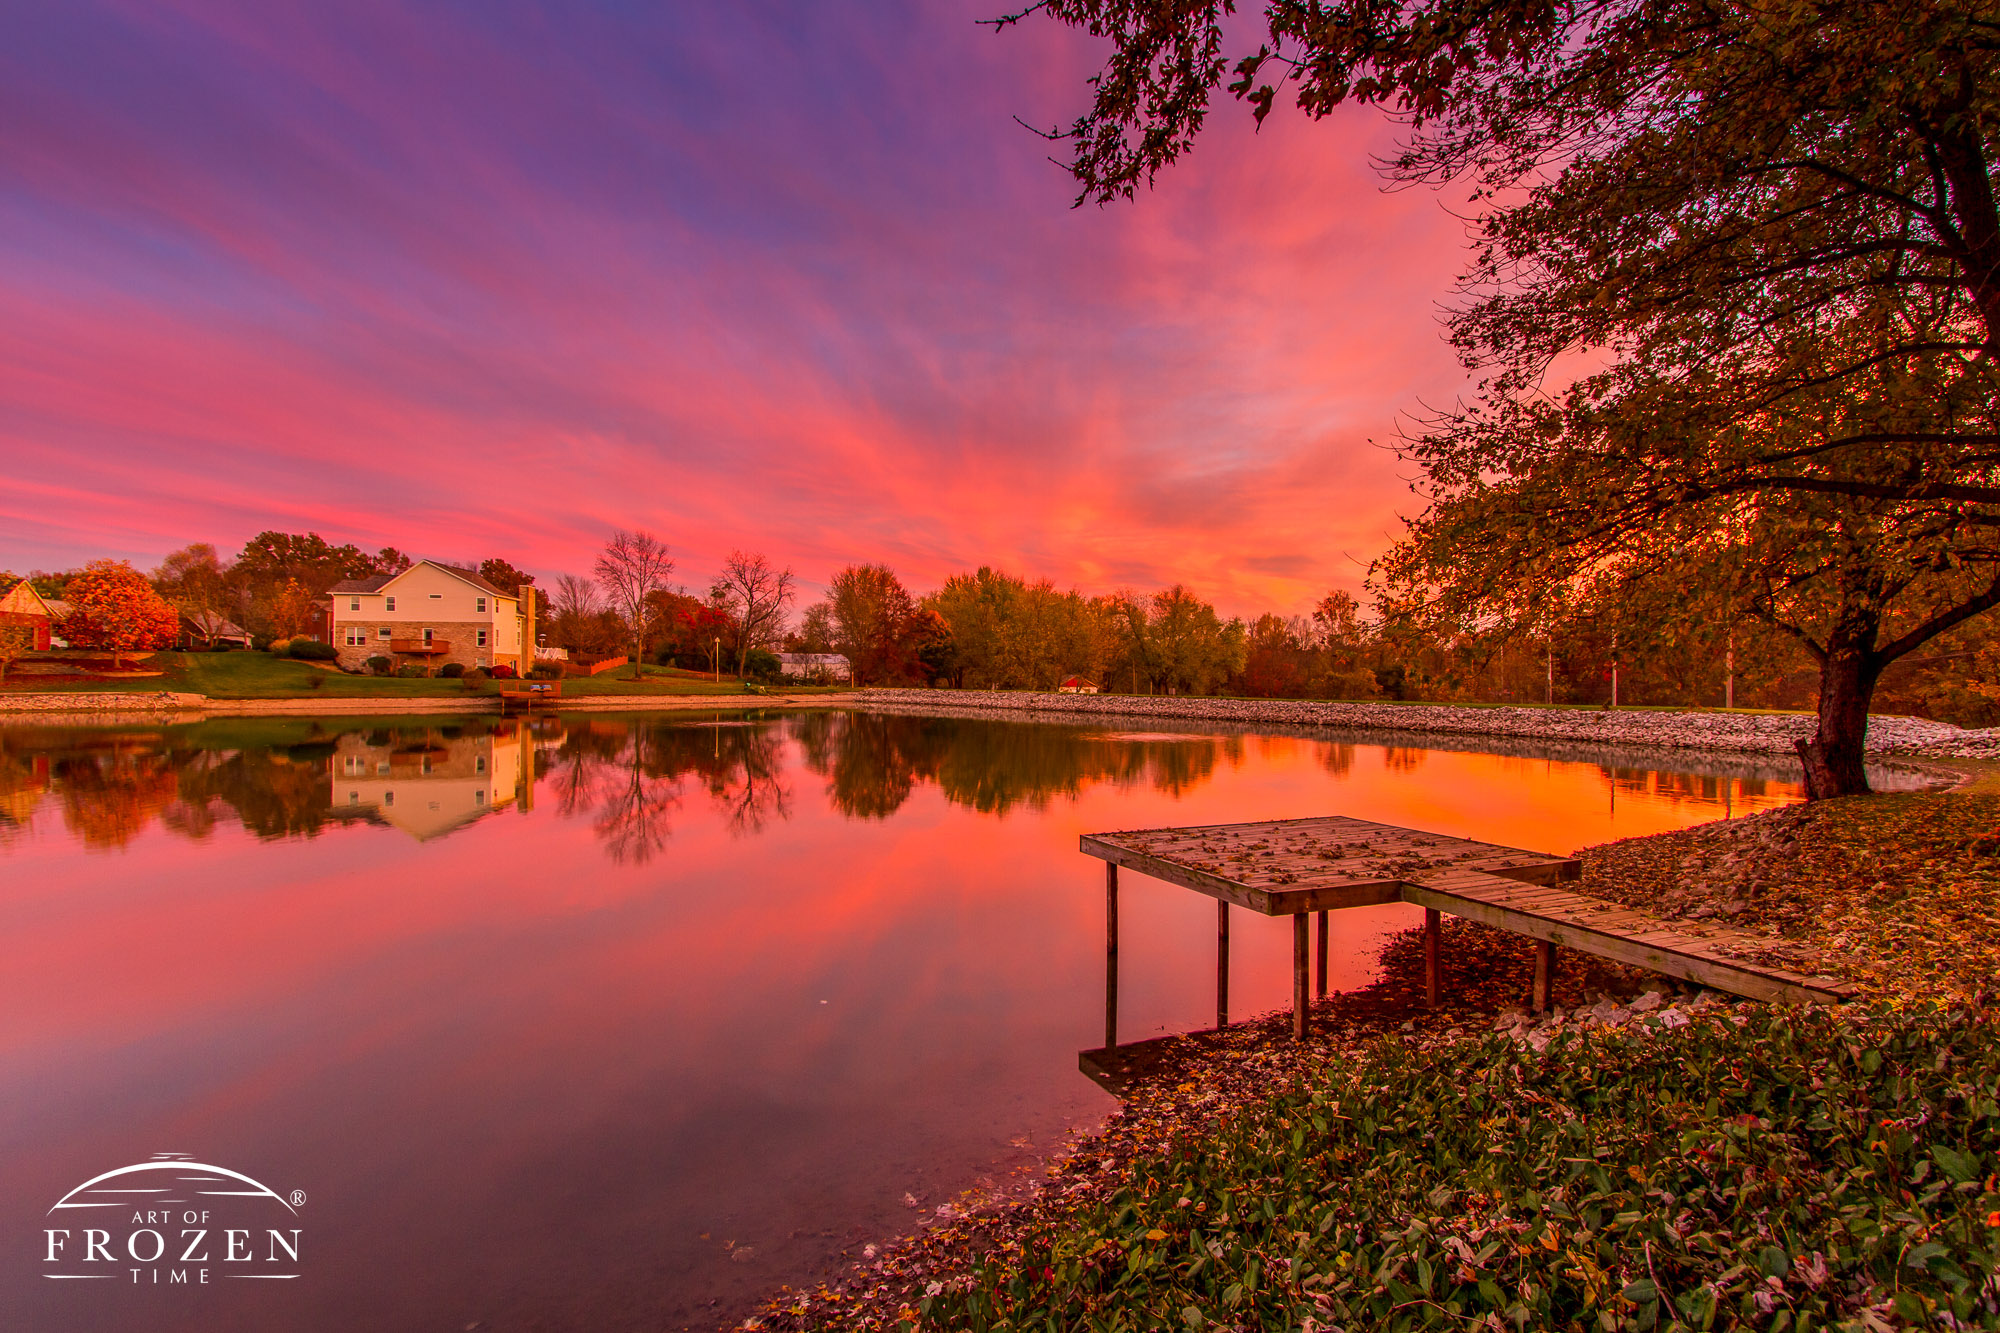 A local scene of a dock in a pond, where the orange sky attempted to match the autumn leaves.